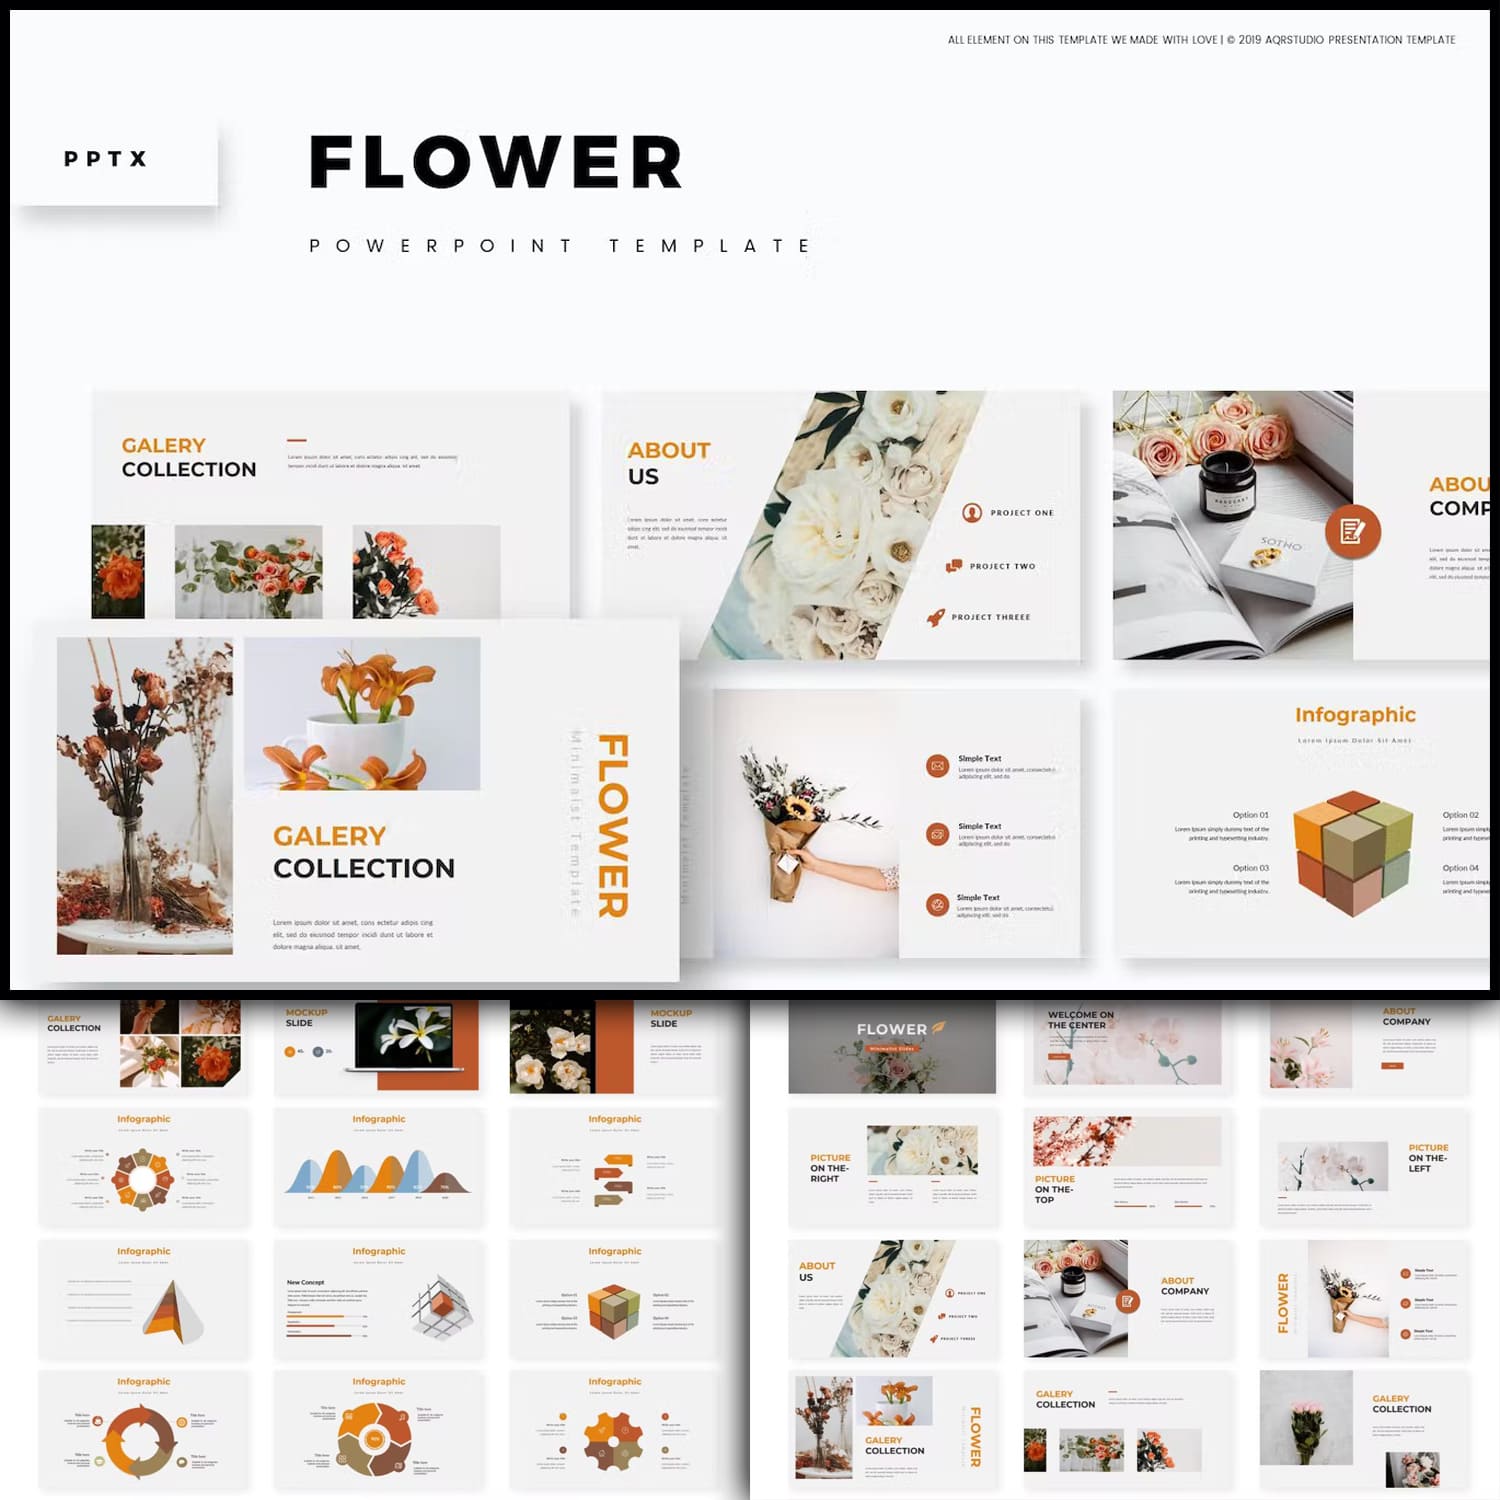 A selection of images of amazing presentation template slides on the theme of flowers.